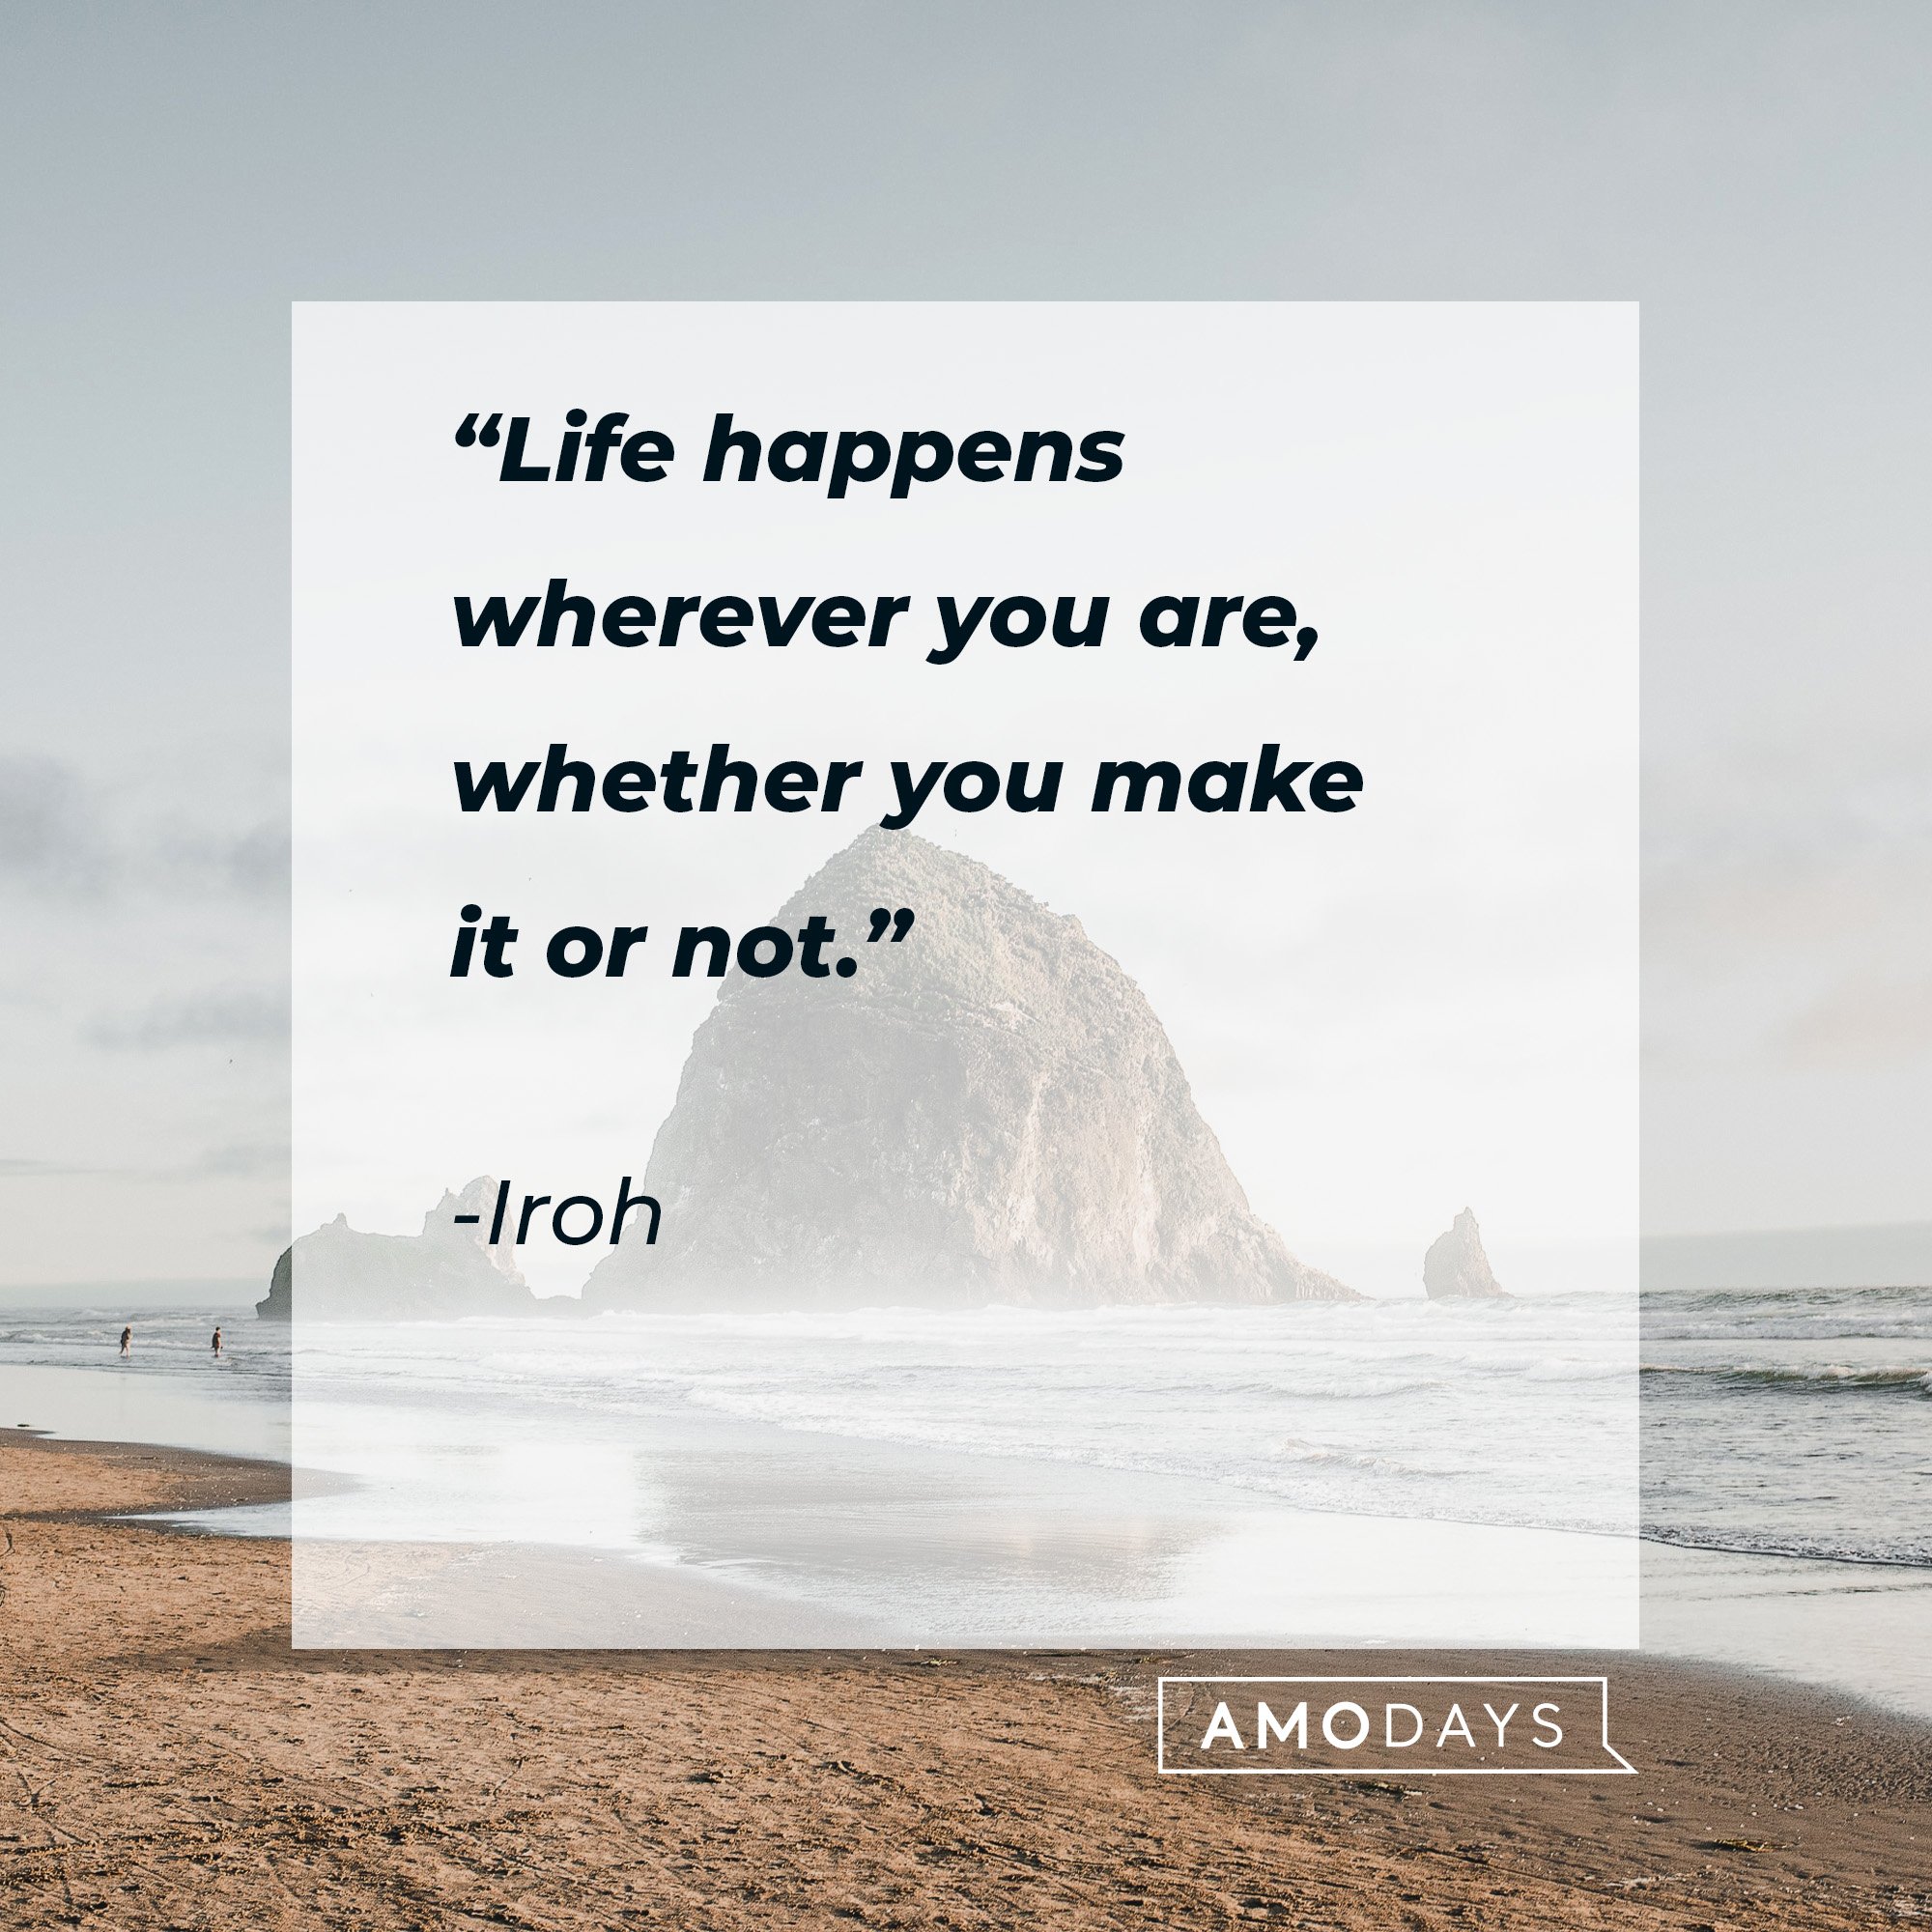  Iroh's quote: “Life happens wherever you are, whether you make it or not.” | Image: AmoDays